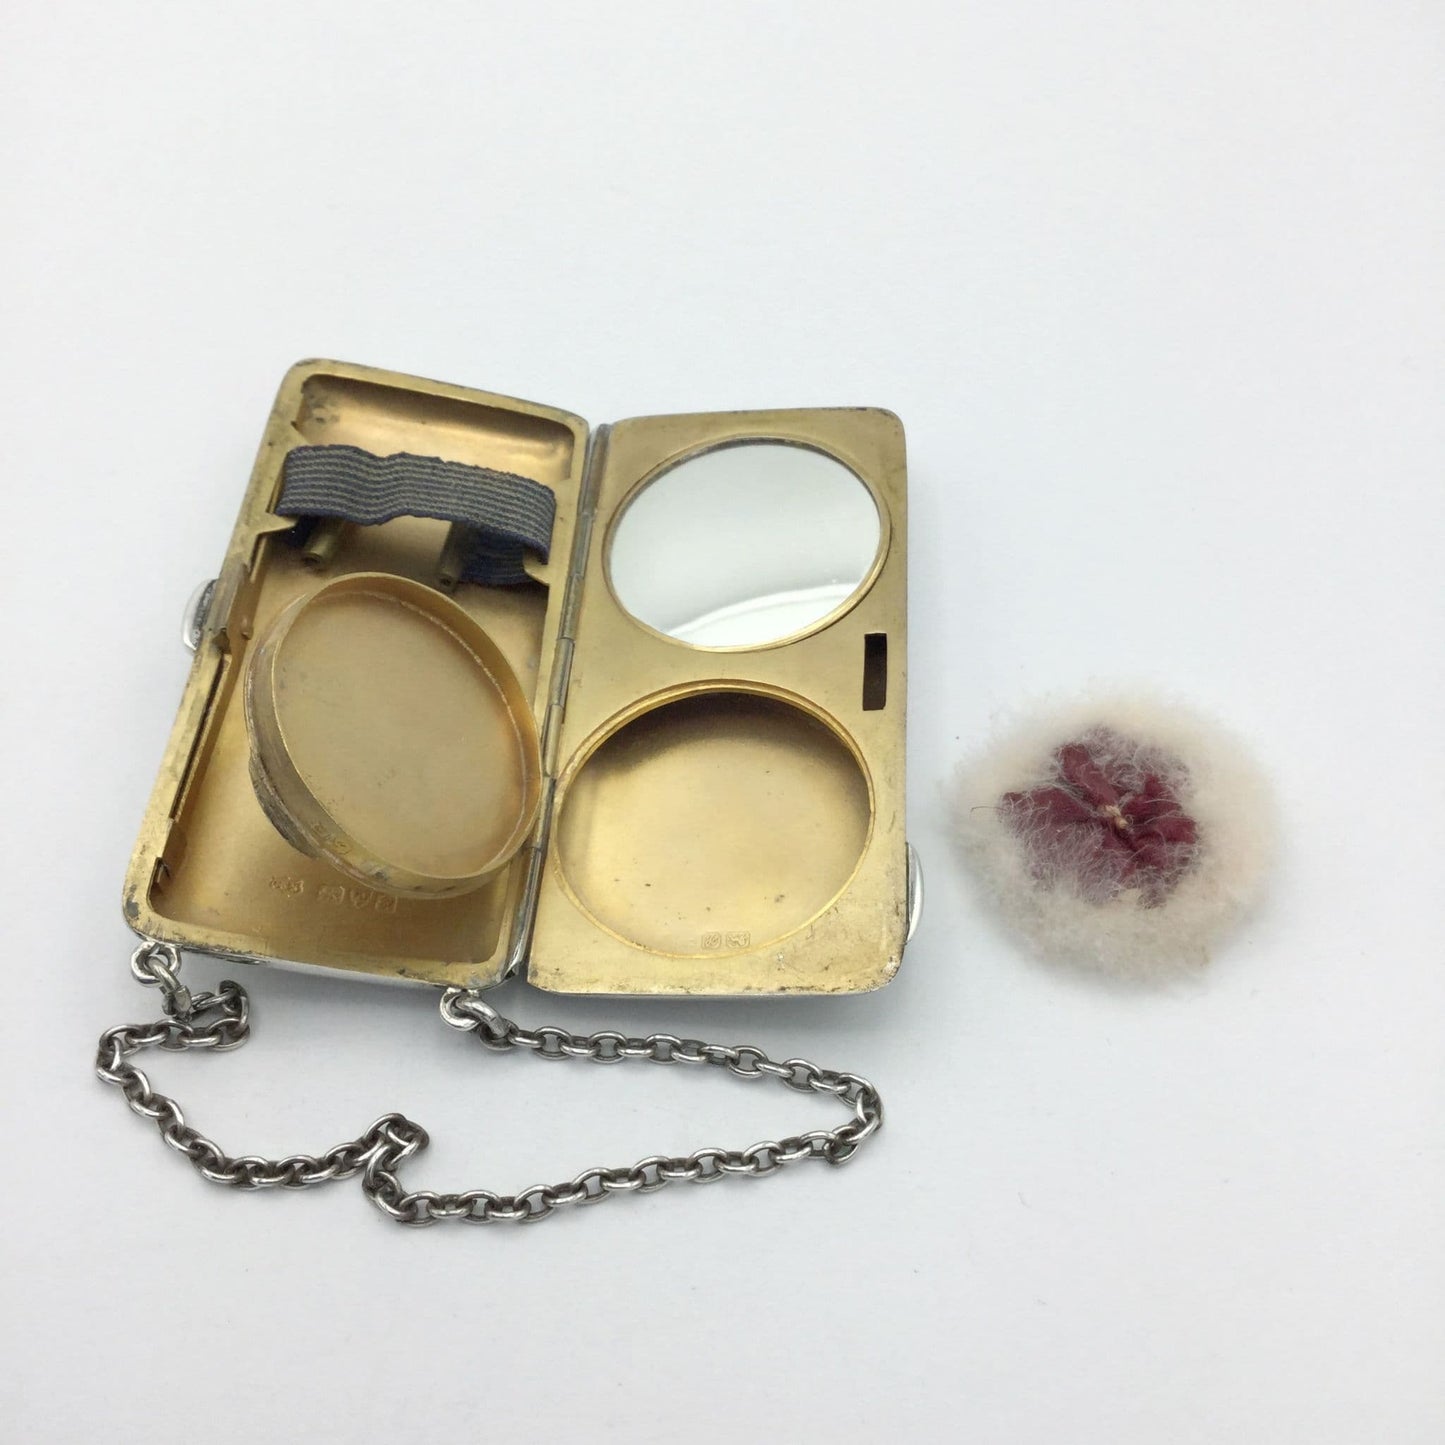 gilded golden inside of case showing a mirror, powder area and chain, with the powder puff at the side